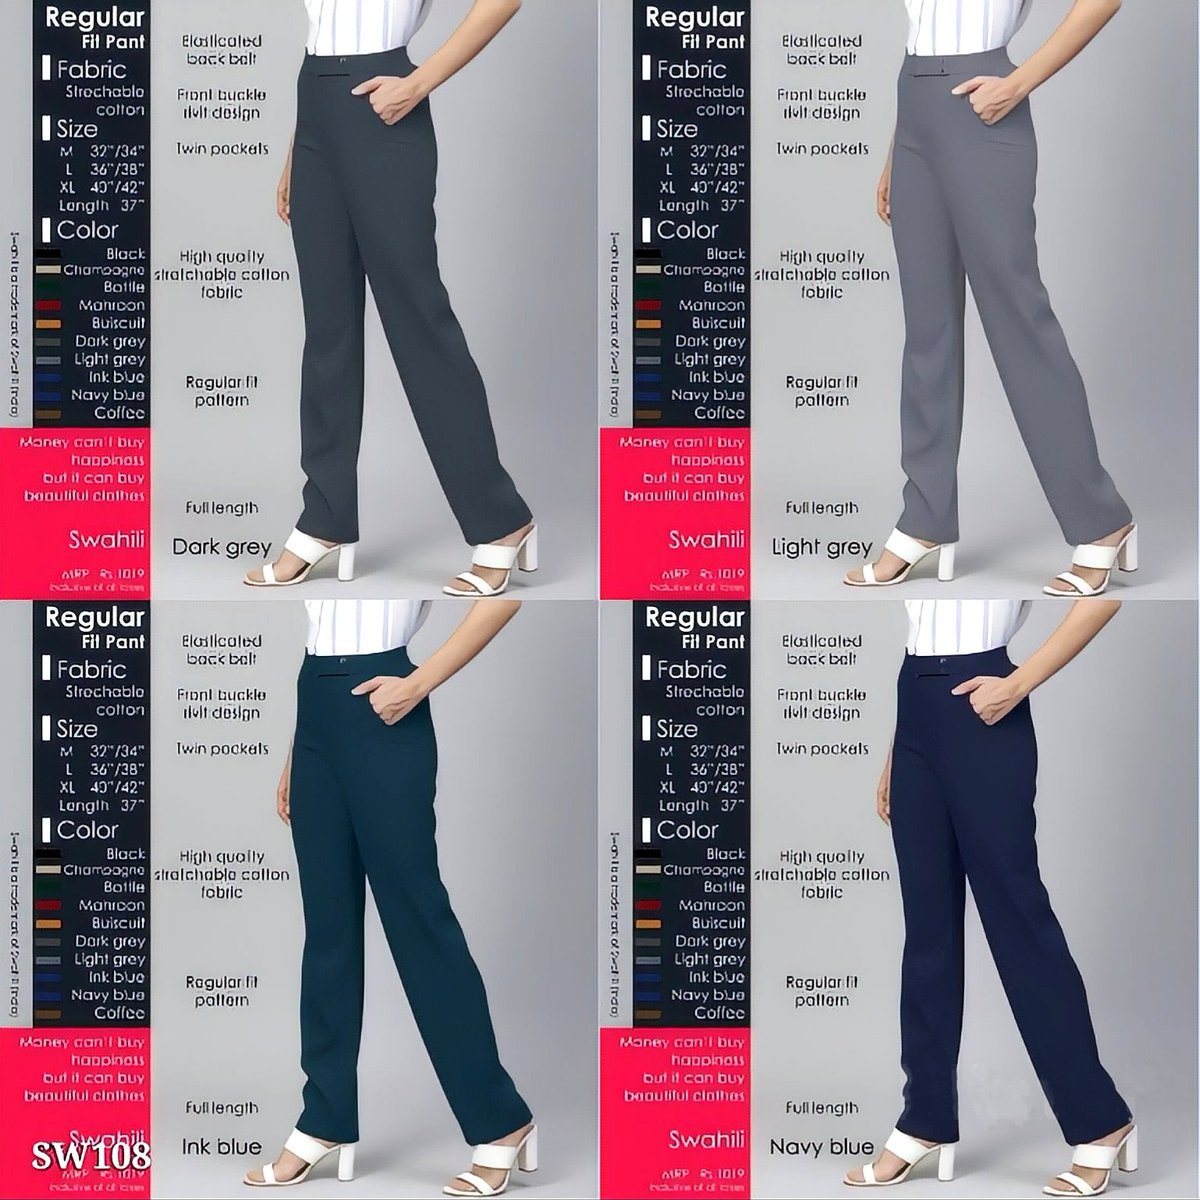 High Quality Stretchable Cotton Pants
Elasticated Back Belt
Front Buckle Rivit Design 
Two pockets
Comfortable Regular Fit
Ankle Broad Opening
Sizes: M: 32'/34' L: 36'/38' XL: 40'/42'
Price: ₹485/-(52% OFF) MRP : ₹1019/-
#pant #fashiongirlspant #pantfashion #girlswear #fashion